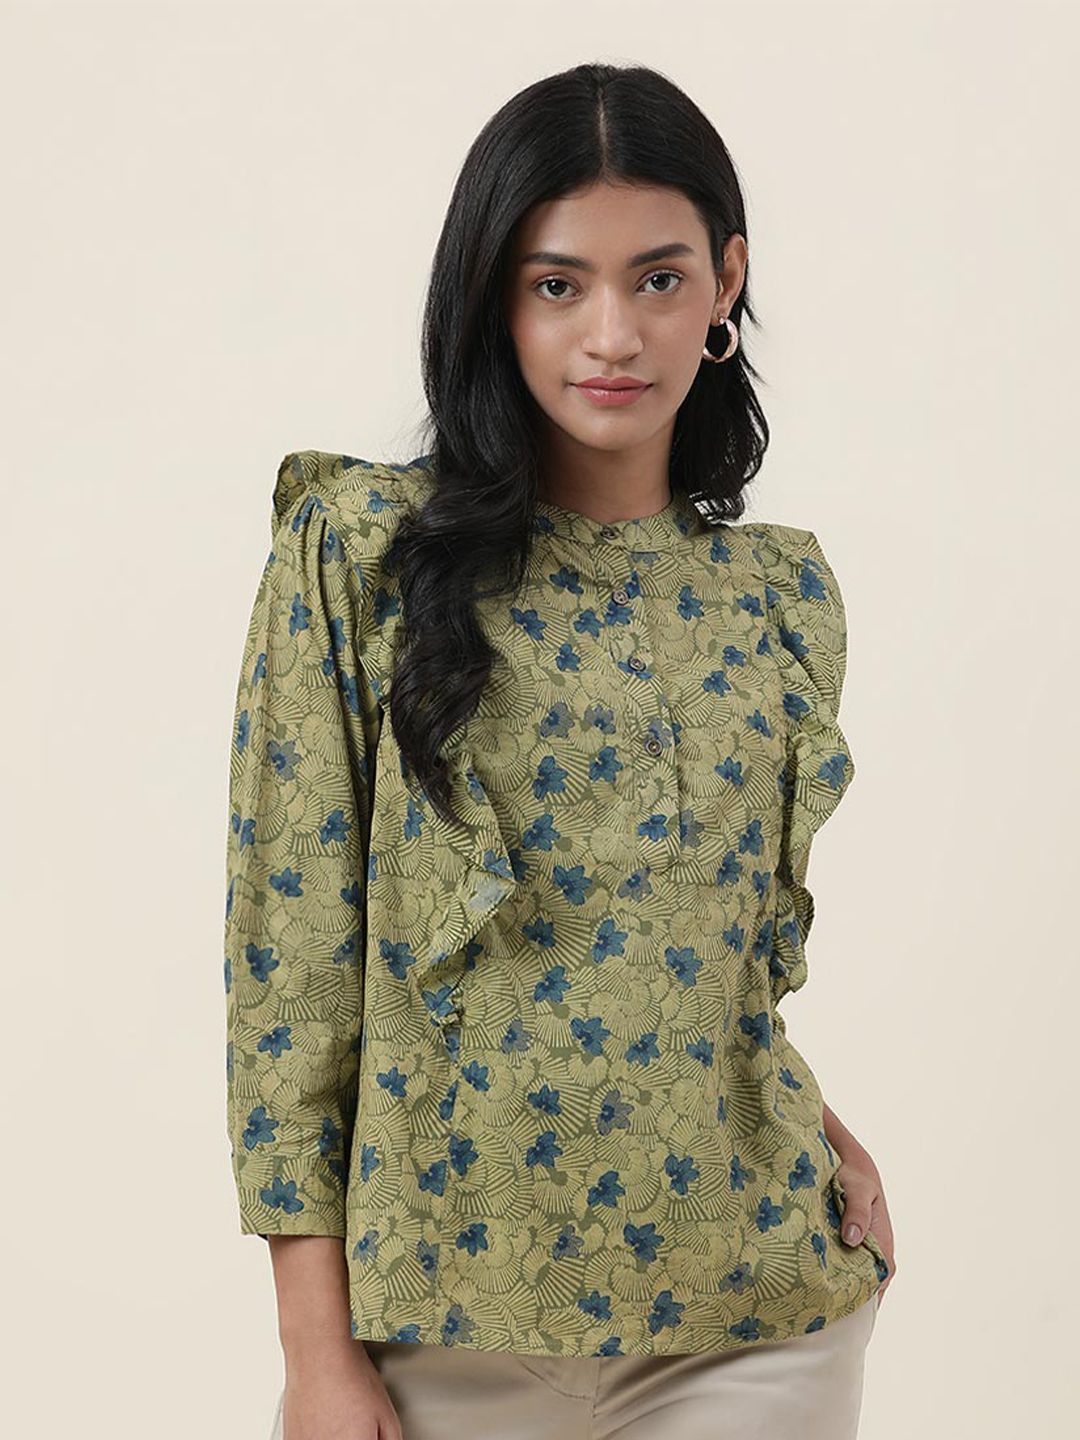 Fabindia Green Floral Print Pure Cotton Top Price in India